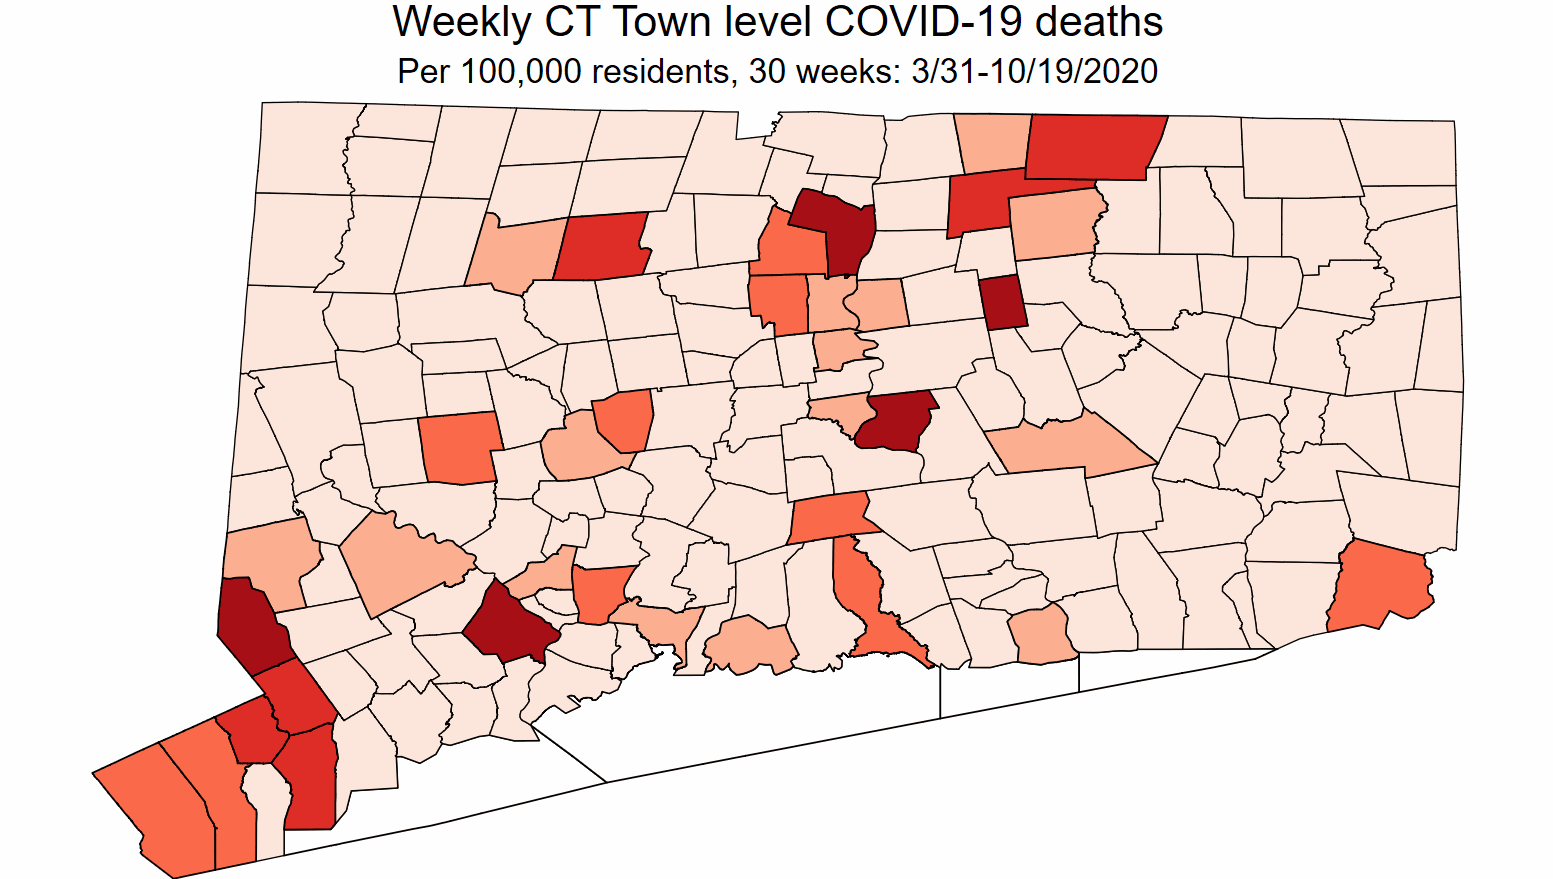 Weekly CT Town level COVID-19 deaths